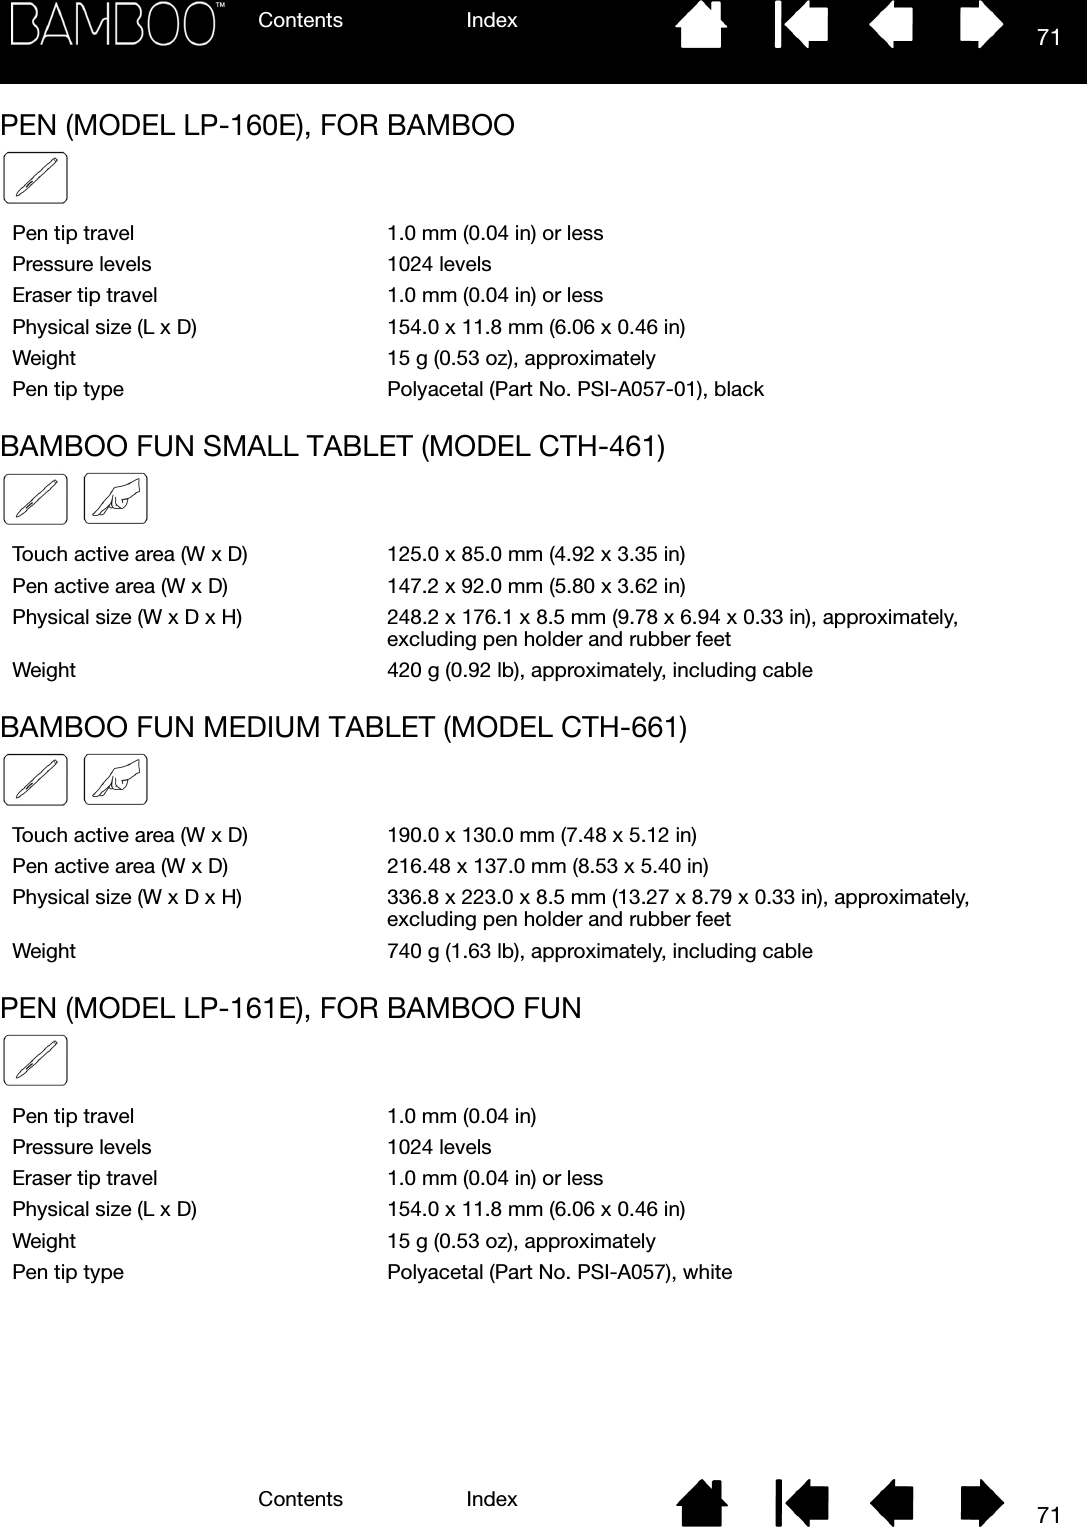 Contents IndexContents 71Index71PEN (MODEL LP-160E), FOR BAMBOOBAMBOO FUN SMALL TABLET (MODEL CTH-461)BAMBOO FUN MEDIUM TABLET (MODEL CTH-661)PEN (MODEL LP-161E), FOR BAMBOO FUNPen tip travel 1.0 mm (0.04 in) or lessPressure levels 1024 levelsEraser tip travel 1.0 mm (0.04 in) or lessPhysical size (L x D) 154.0 x 11.8 mm (6.06 x 0.46 in)Weight 15 g (0.53 oz), approximatelyPen tip type Polyacetal (Part No. PSI-A057-01), blackTouch active area (W x D) 125.0 x 85.0 mm (4.92 x 3.35 in)Pen active area (W x D) 147.2 x 92.0 mm (5.80 x 3.62 in)Physical size (W x D x H) 248.2 x 176.1 x 8.5 mm (9.78 x 6.94 x 0.33 in), approximately, excluding pen holder and rubber feetWeight 420 g (0.92 lb), approximately, including cableTouch active area (W x D) 190.0 x 130.0 mm (7.48 x 5.12 in)Pen active area (W x D) 216.48 x 137.0 mm (8.53 x 5.40 in)Physical size (W x D x H) 336.8 x 223.0 x 8.5 mm (13.27 x 8.79 x 0.33 in), approximately, excluding pen holder and rubber feetWeight 740 g (1.63 lb), approximately, including cablePen tip travel 1.0 mm (0.04 in)Pressure levels 1024 levelsEraser tip travel 1.0 mm (0.04 in) or lessPhysical size (L x D) 154.0 x 11.8 mm (6.06 x 0.46 in)Weight 15 g (0.53 oz), approximatelyPen tip type Polyacetal (Part No. PSI-A057), white